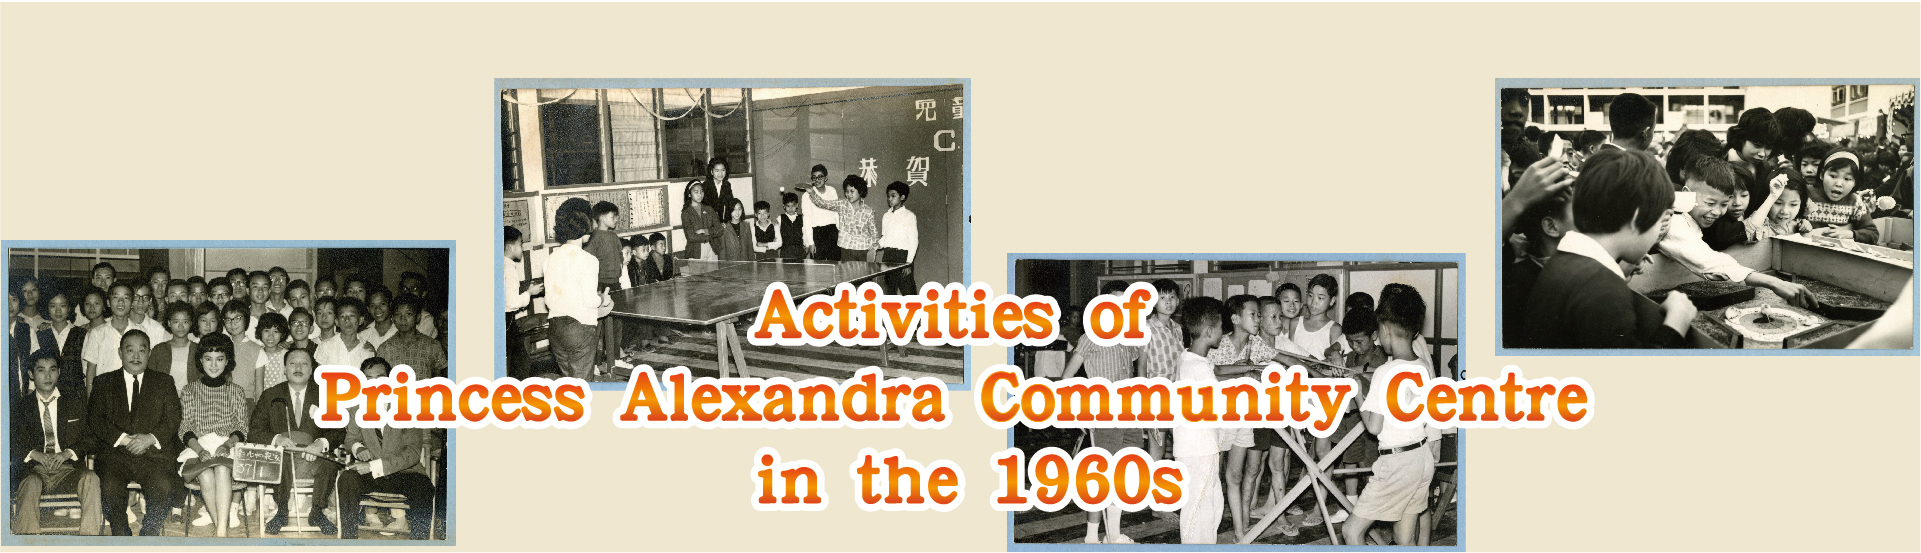 Activities of Princess Alexandra Community Centre in the 1960s